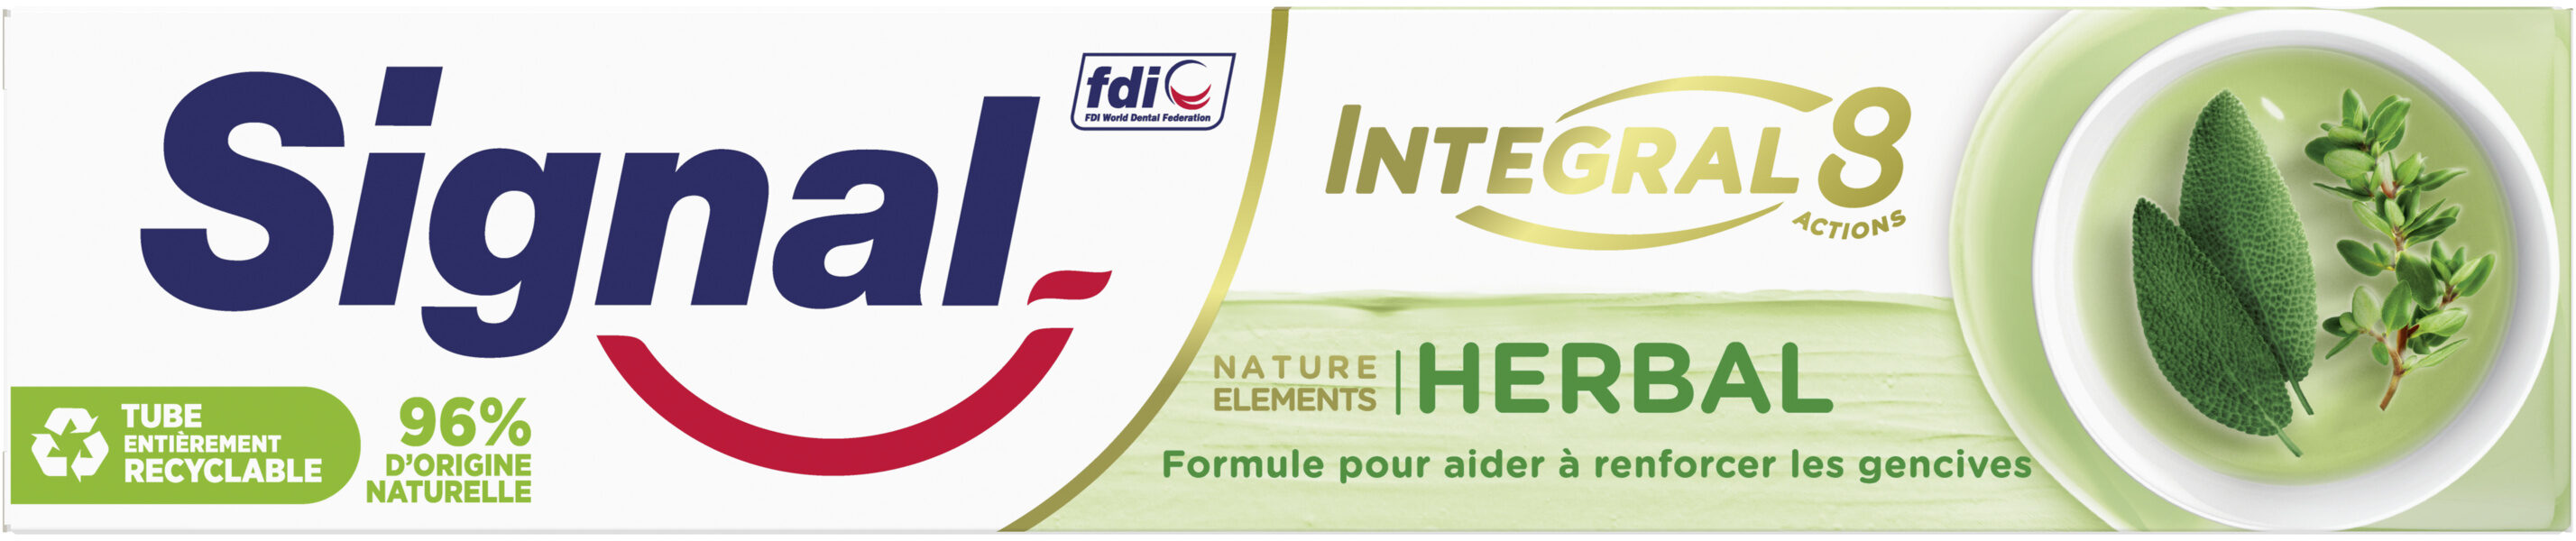 SIGNAL Dentifrice Integral 8 Nature Elements Herbal 75ml - Product - fr